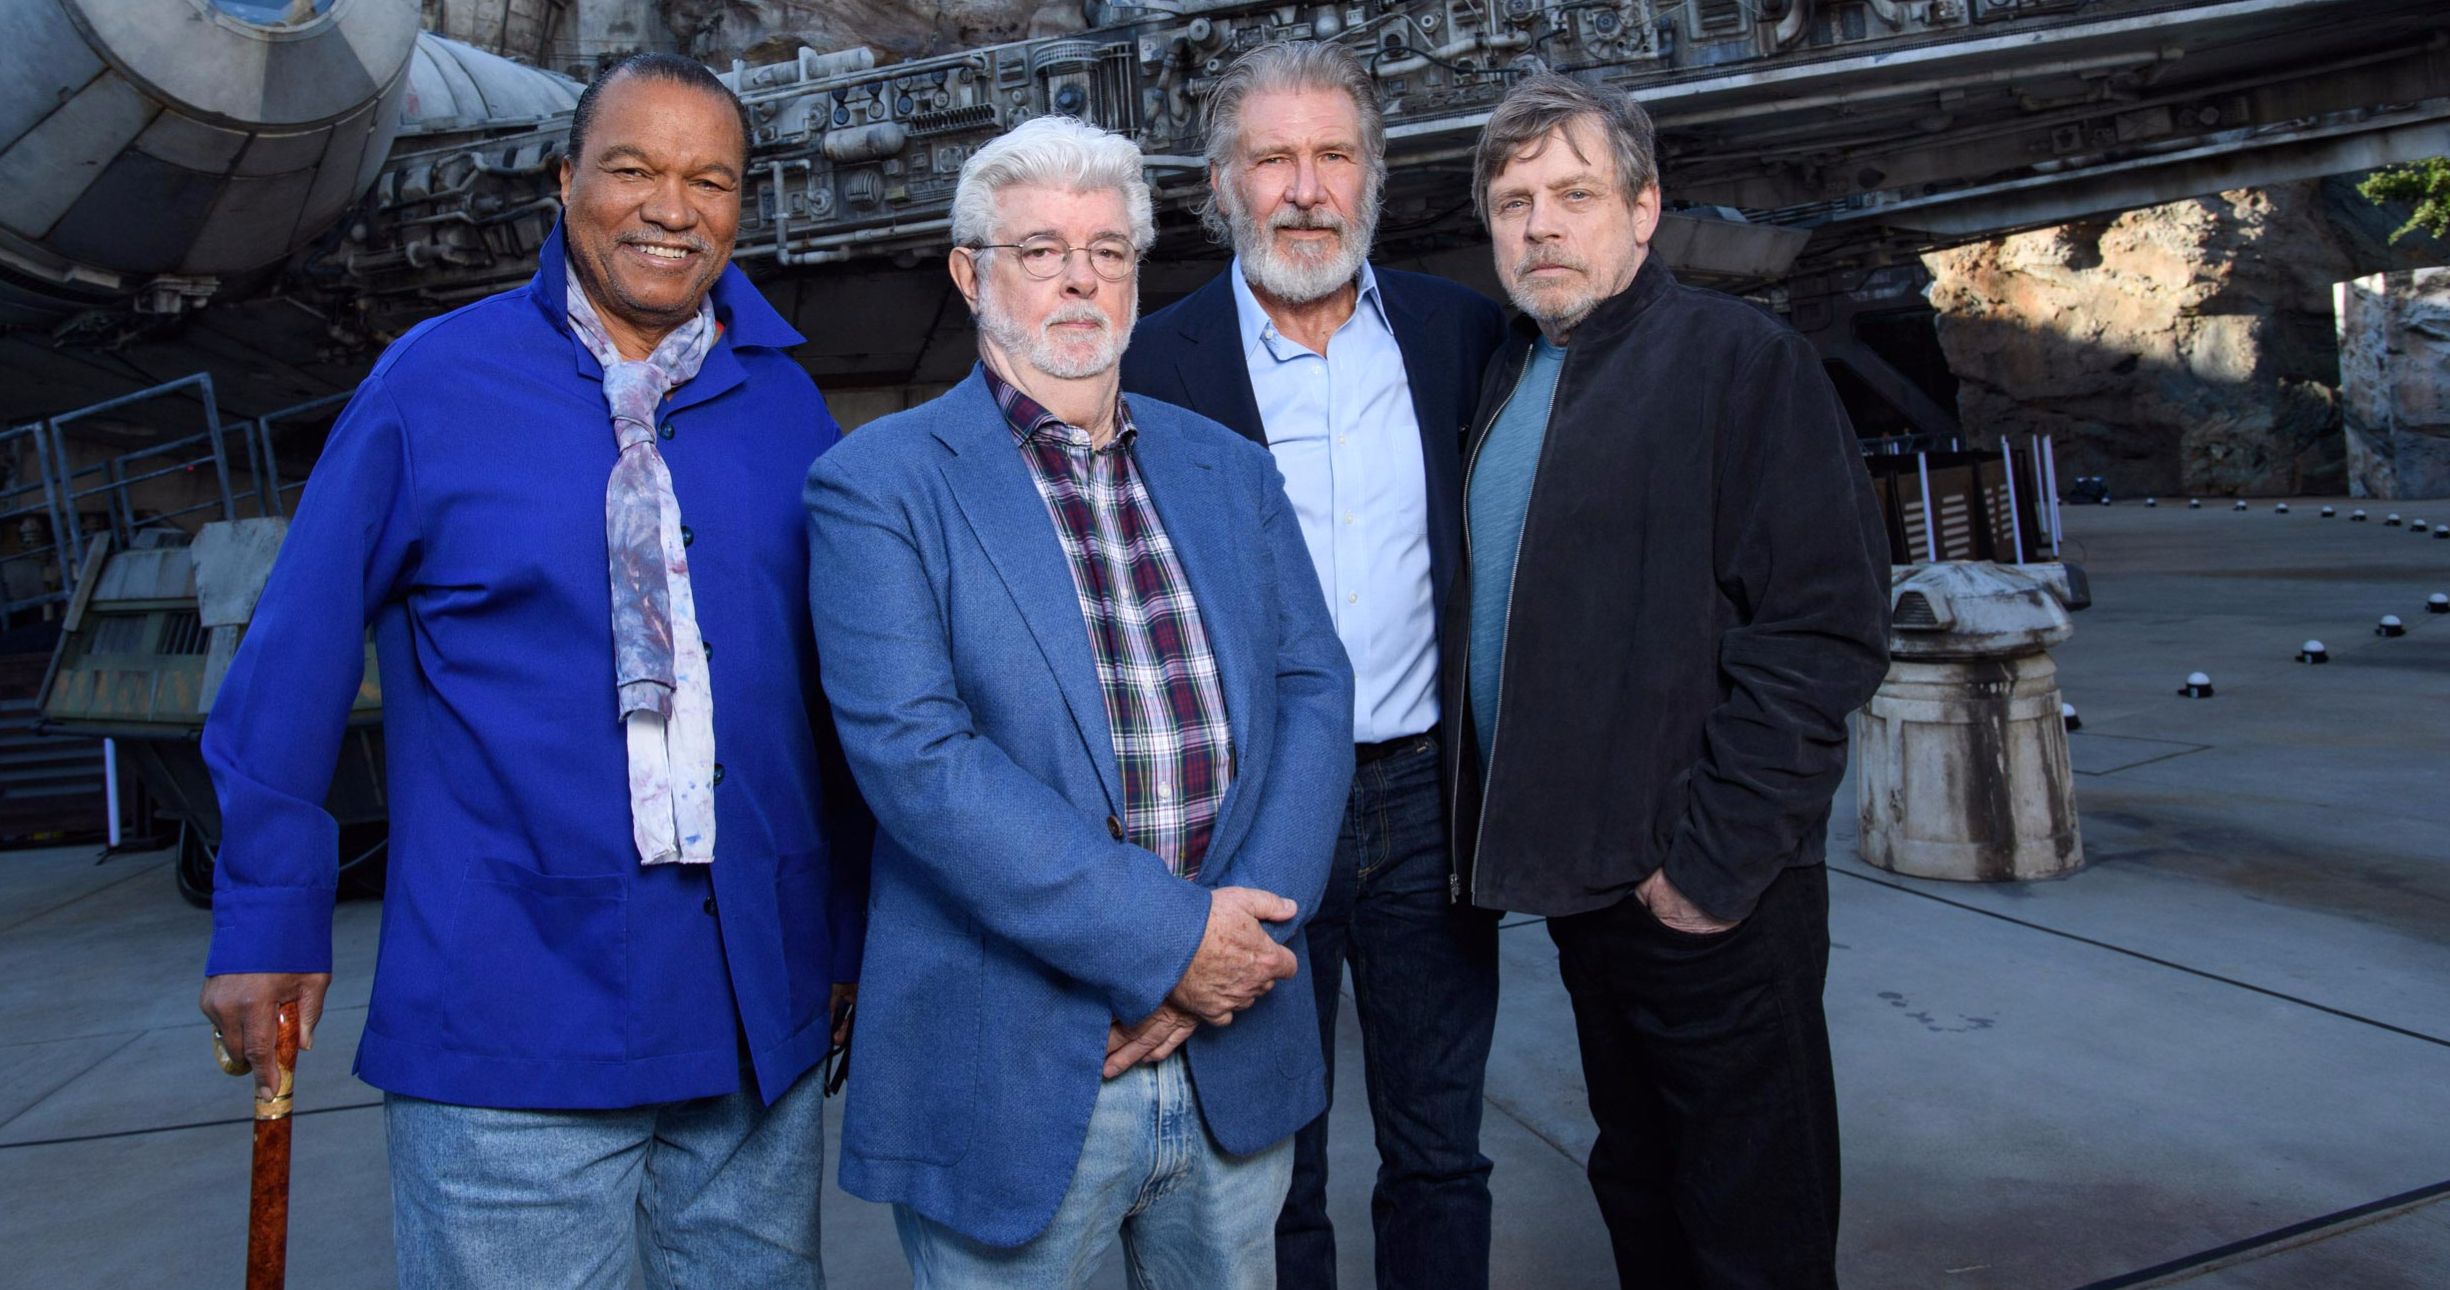 Galaxy's Edge Opens at Disneyland with Original Star Wars Cast Along for the Ride